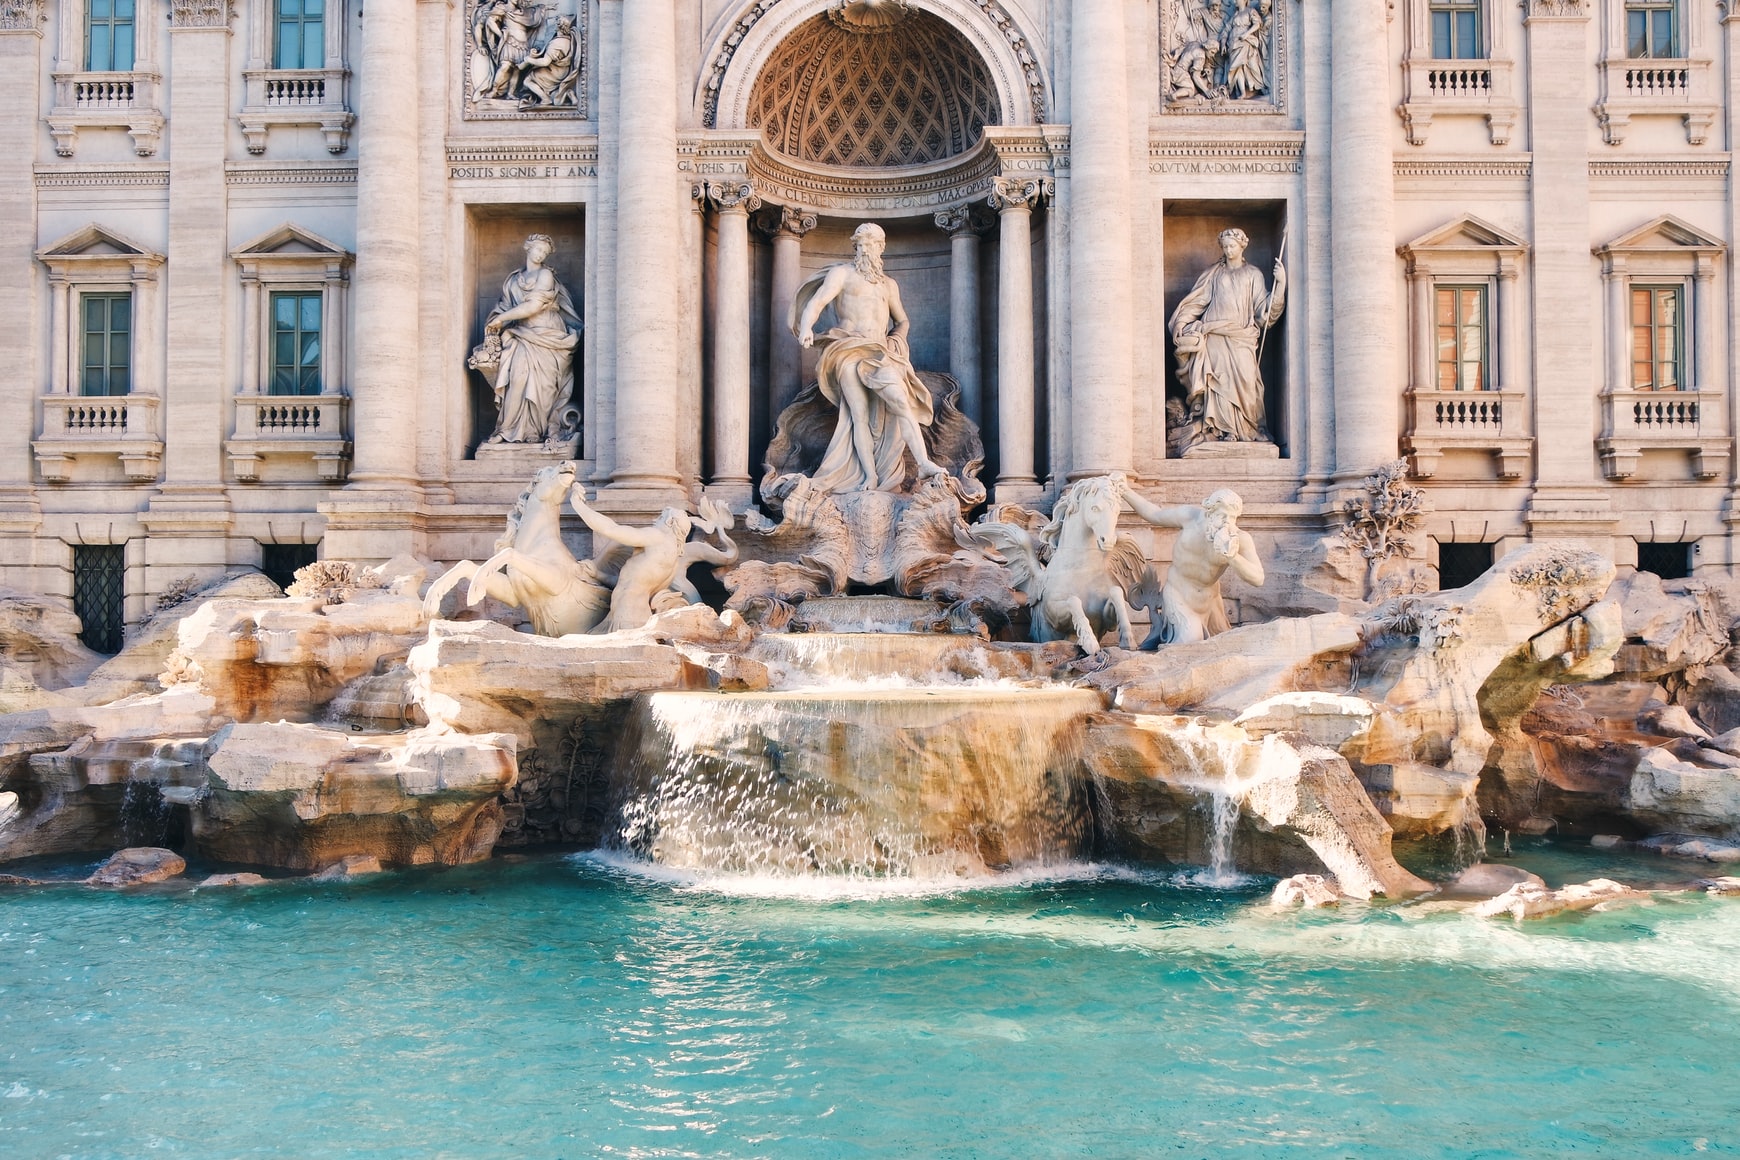 Places to visit in Rome - Trevi Fountain